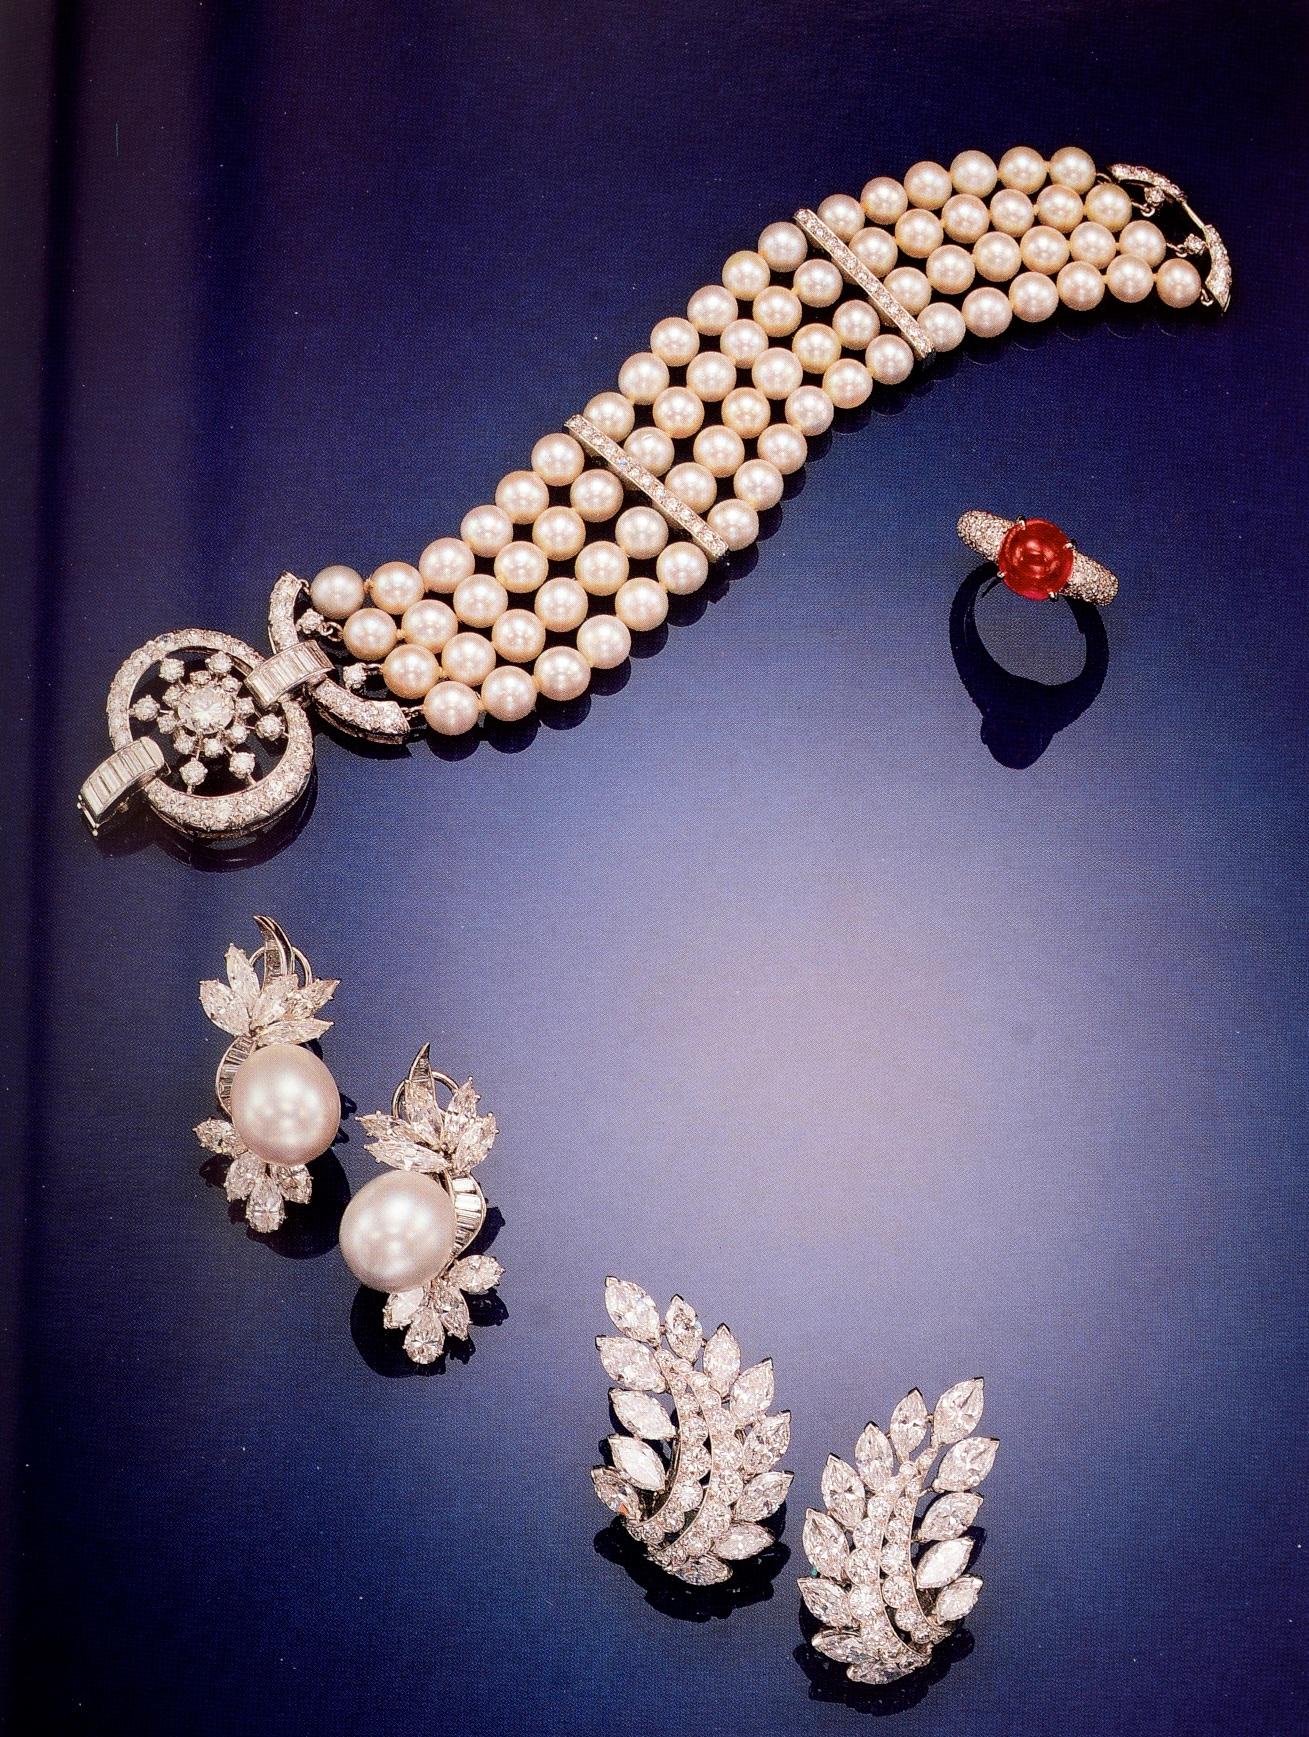 Magnificent Jewelry, New York, April 22-23, 1991, Sotheby's Sale # 6163 9